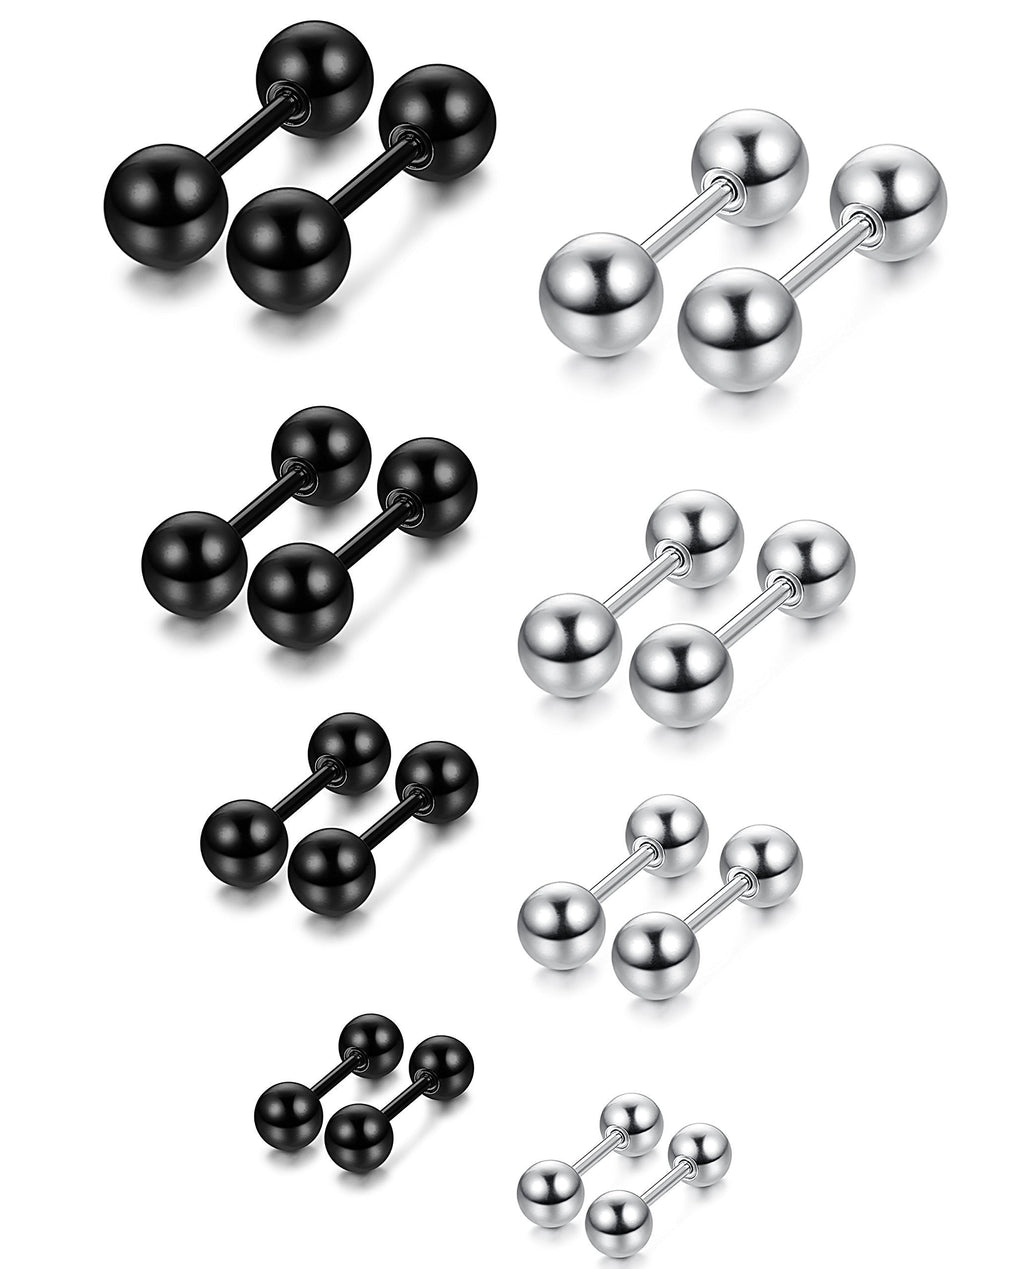 [Australia] - LOYALLOOK 8 Pairs Stainless Steel Ball Stud Earrings Barbell Cartilage Helix Ear Piercing 3-6mm 2 Colors 18G (4 pairs white+4 pairs black) 